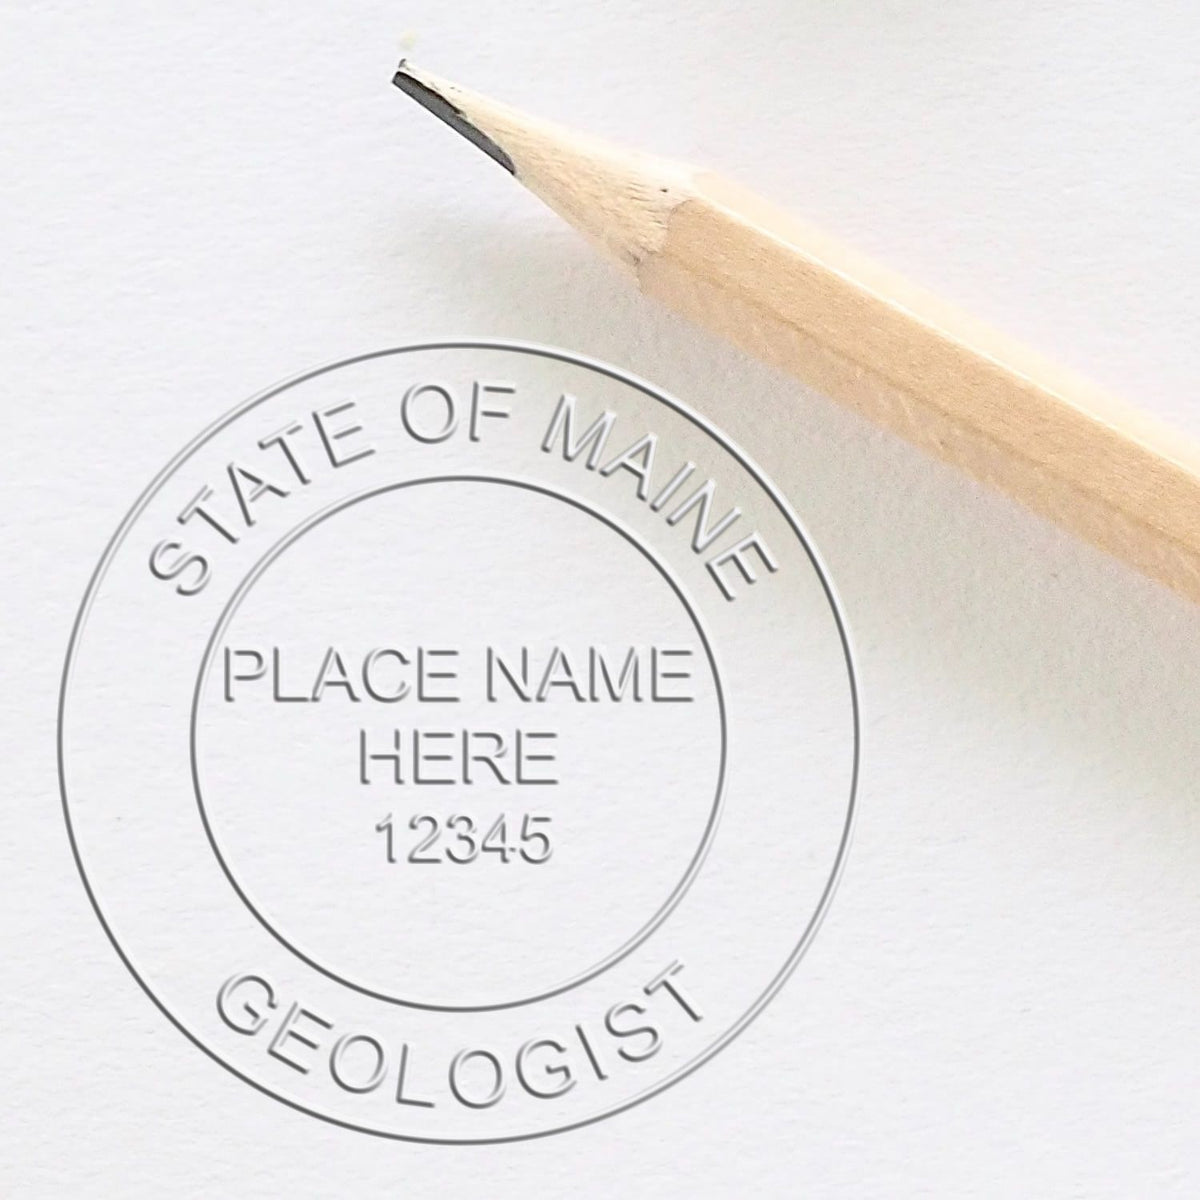 An alternative view of the Handheld Maine Professional Geologist Embosser stamped on a sheet of paper showing the image in use